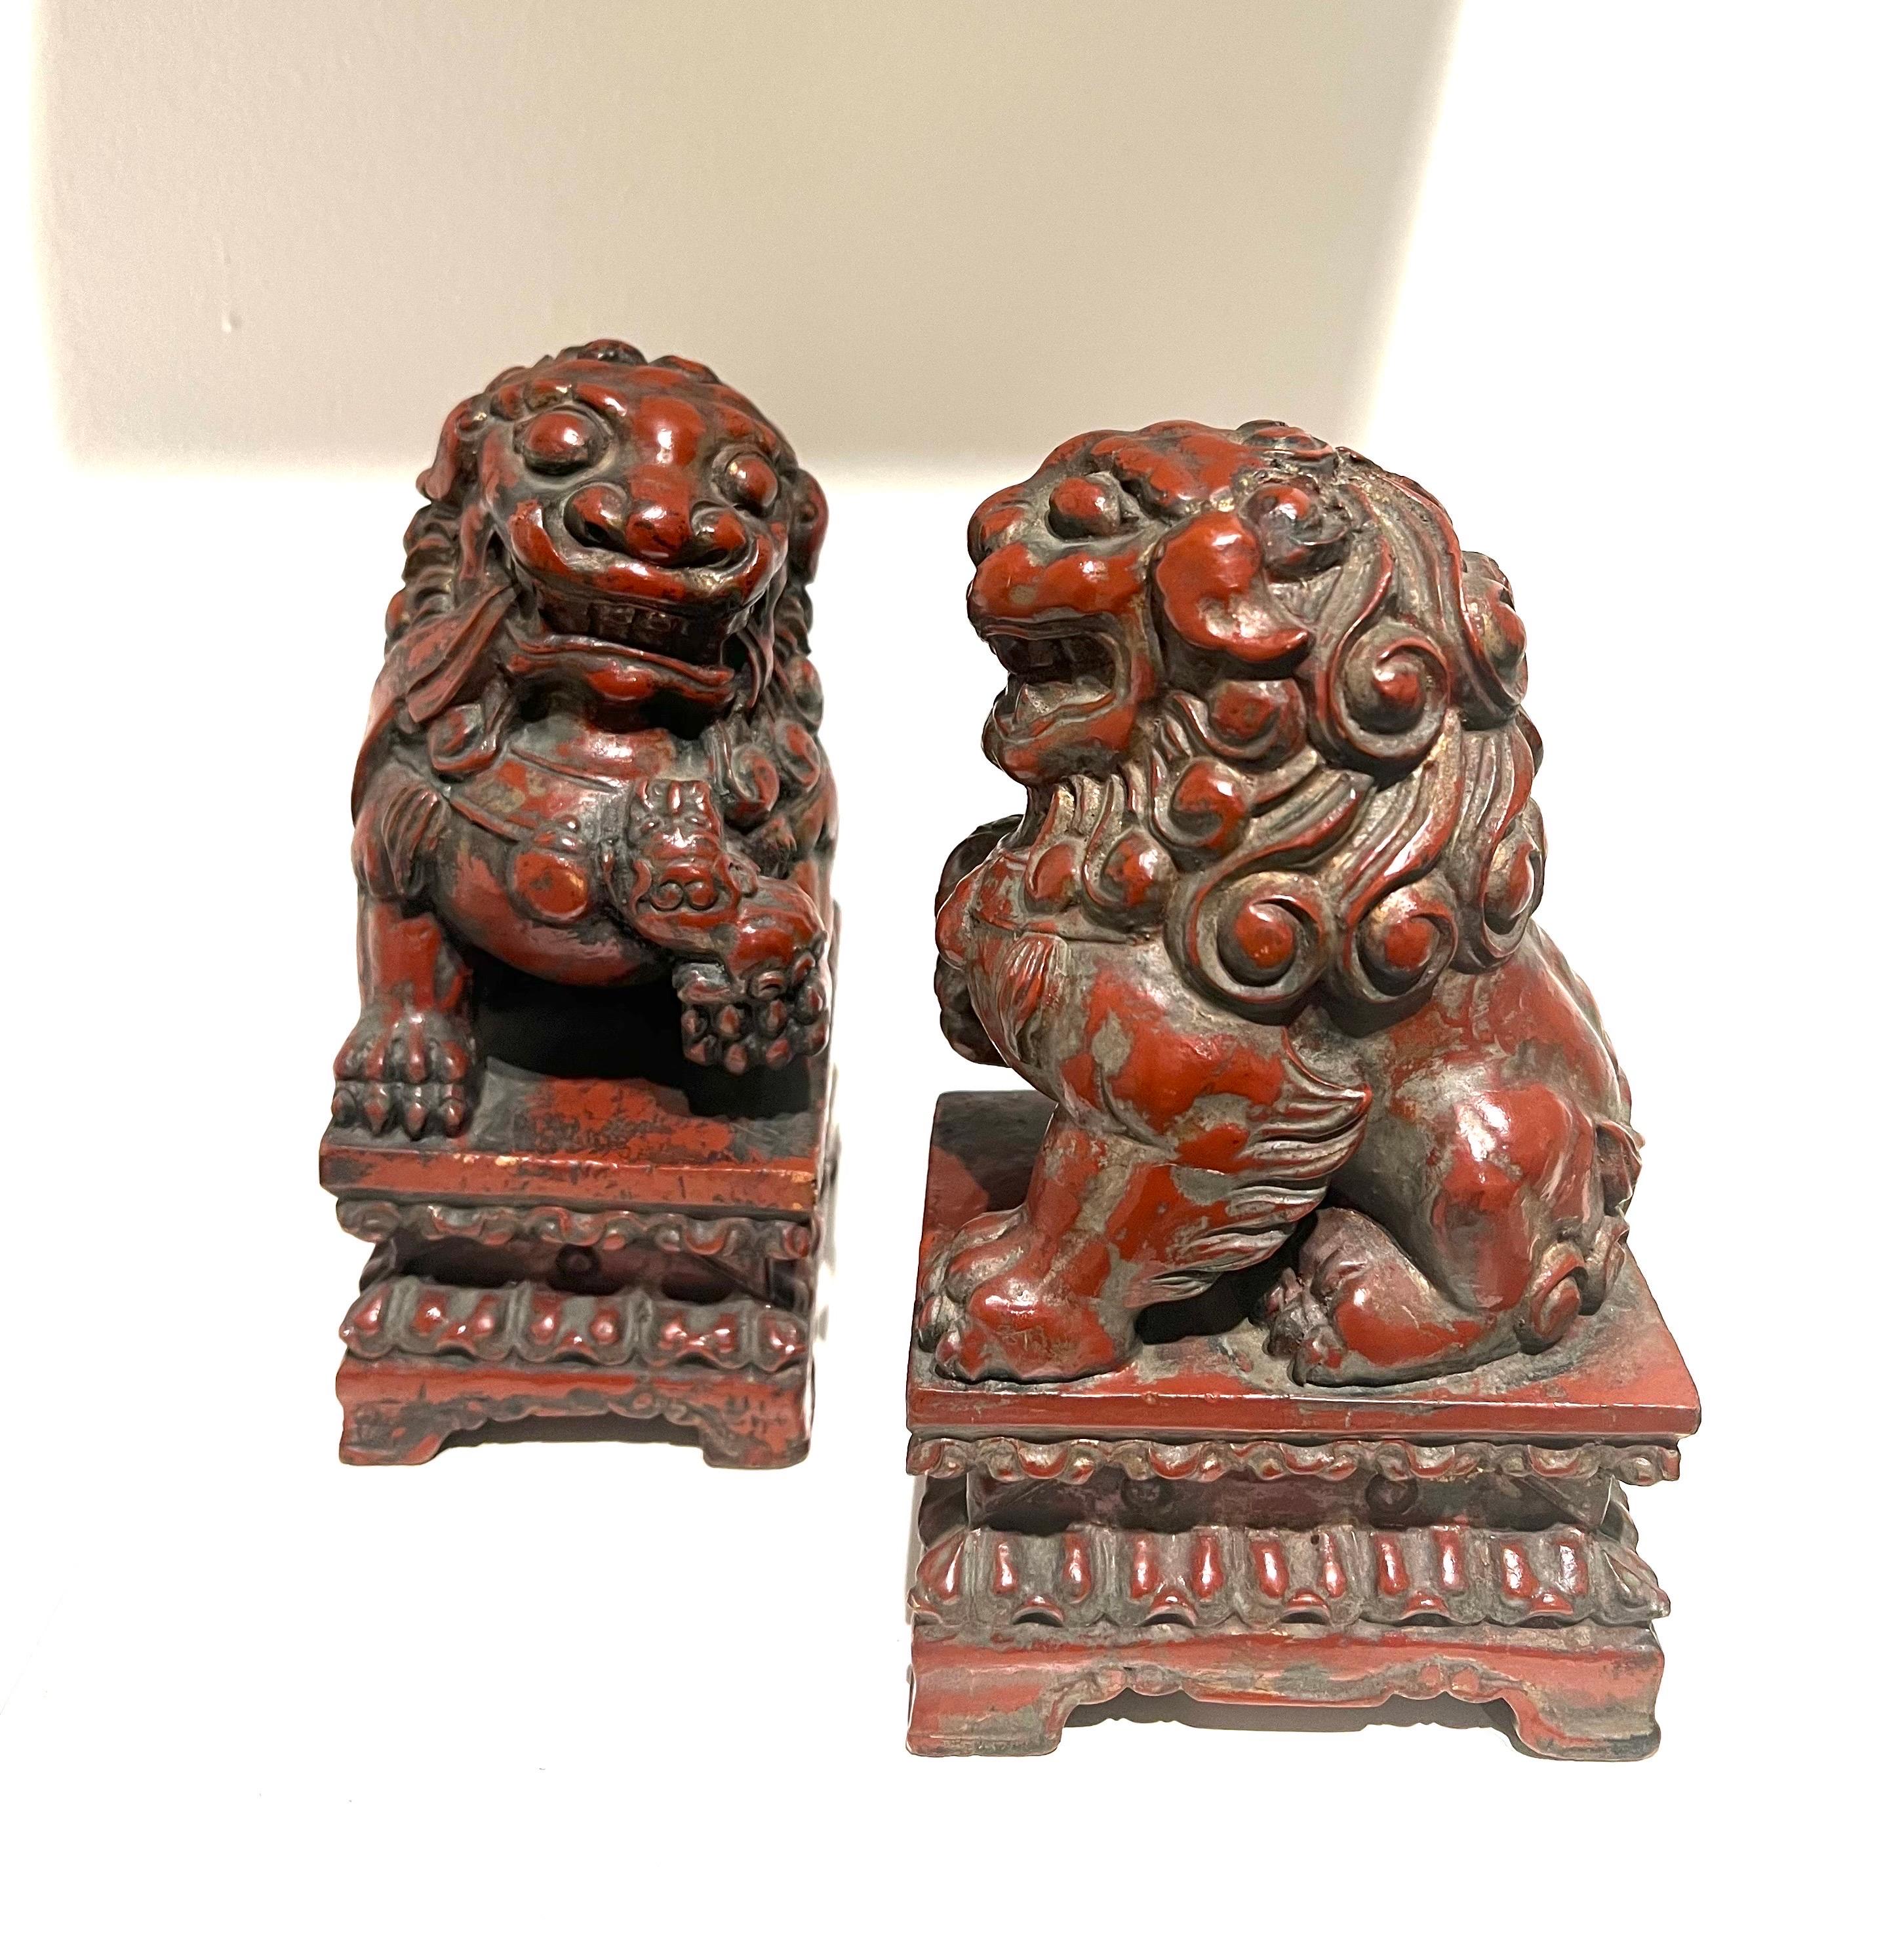 A very nice pair of vintage, red lacquered wood carved foo dogs from Japan. Excellent condition and patina; make a fun decor item in any room!